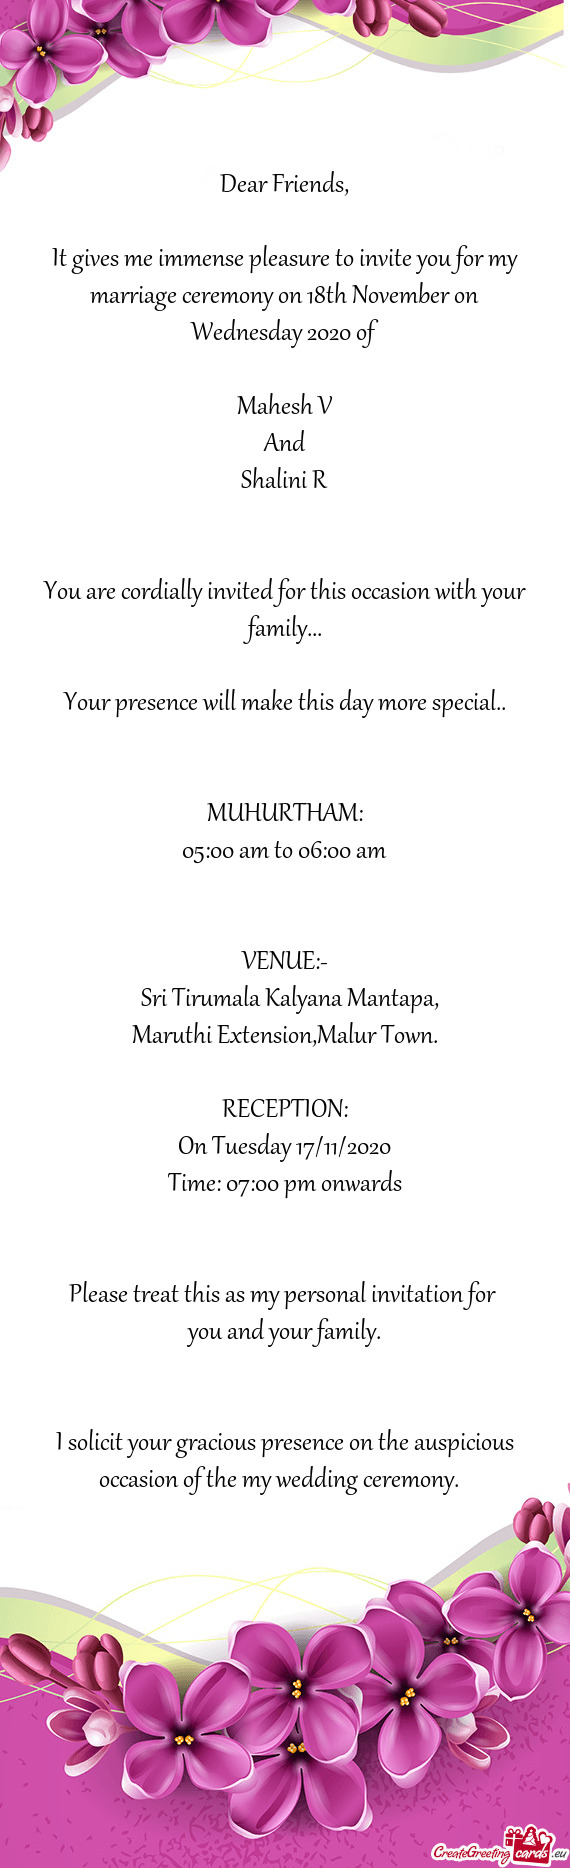 It gives me immense pleasure to invite you for my marriage ceremony on 18th November on Wednesday 20